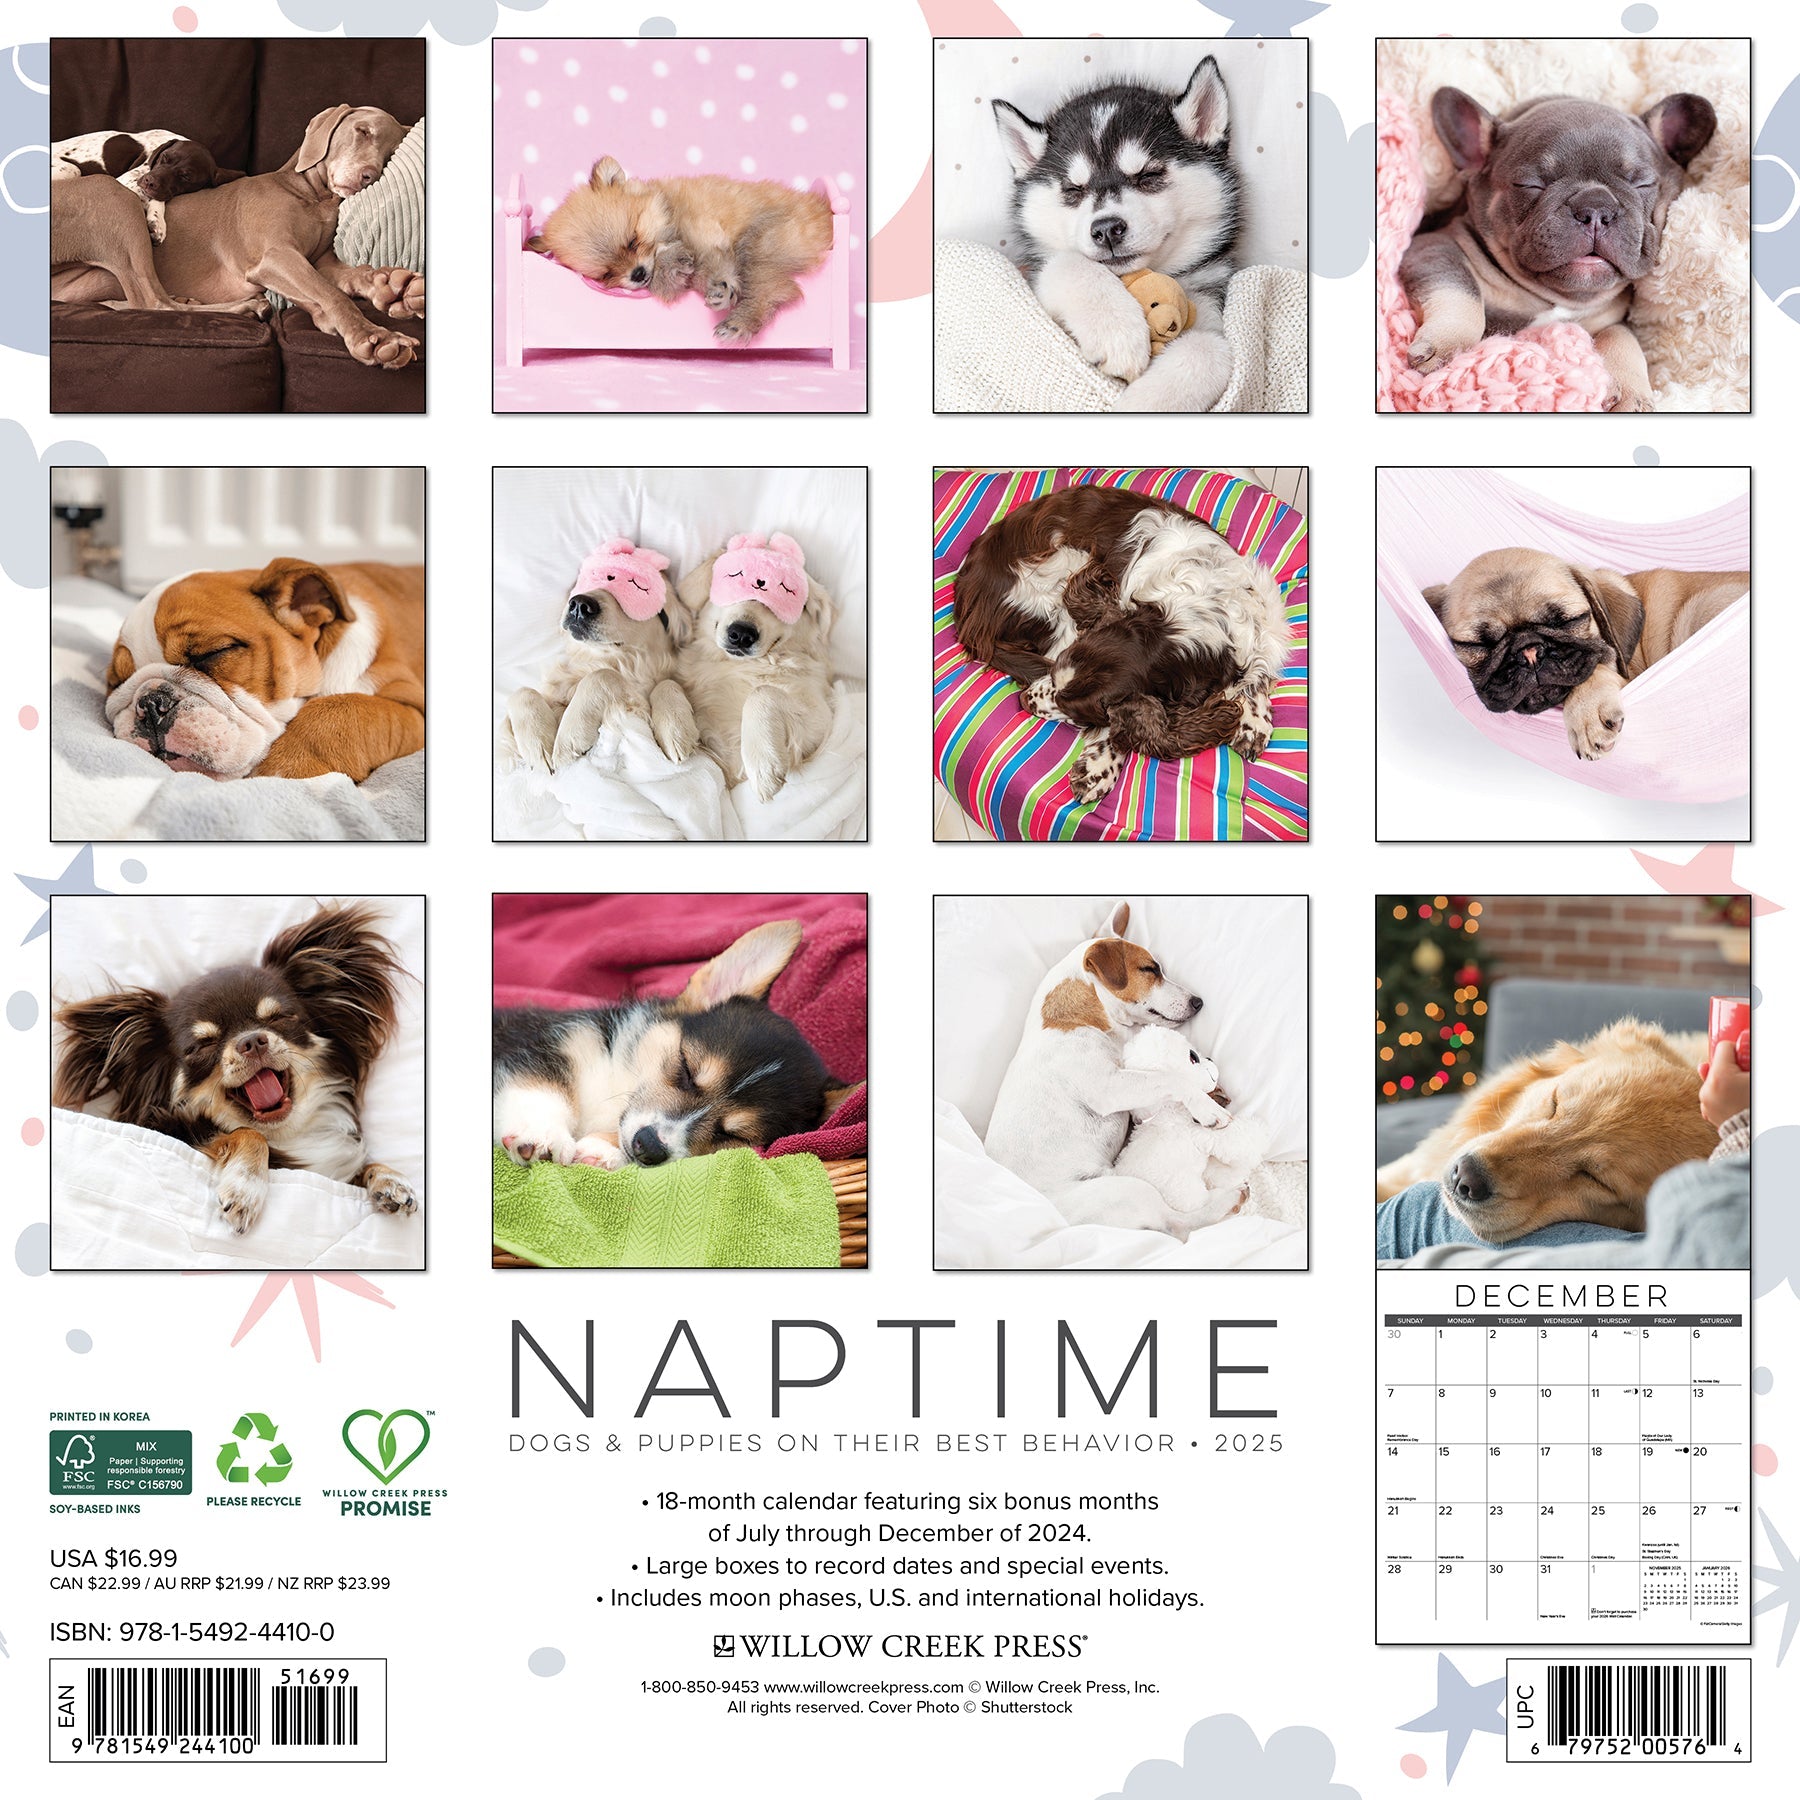 2025 Naptime: Dogs & Puppies on their Best Behavior - Square Wall Calendar (US Only)